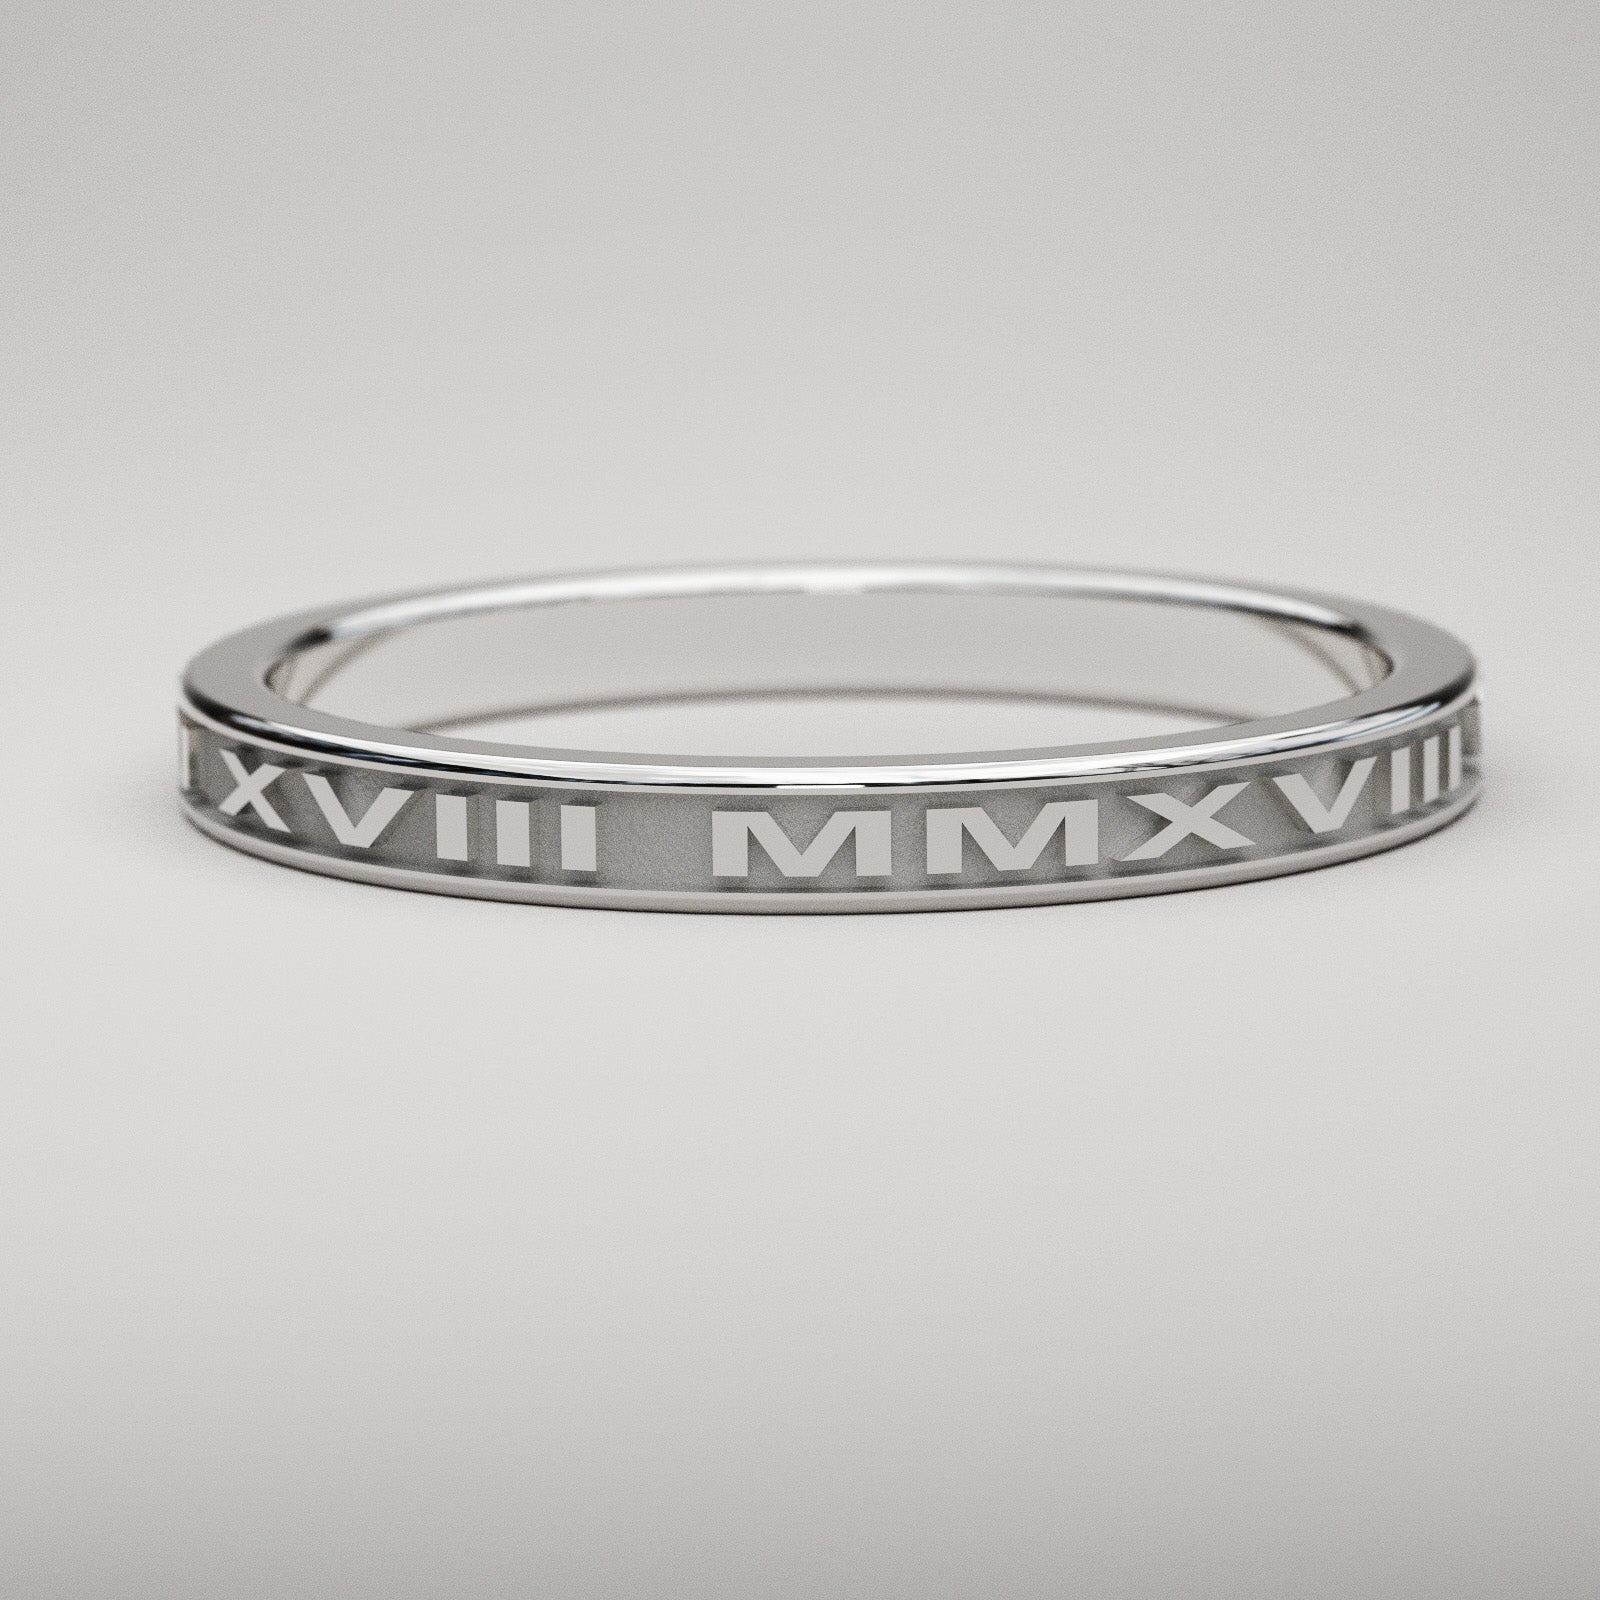 Custom date ring in 14k white gold featuring your date in Roman Numerals